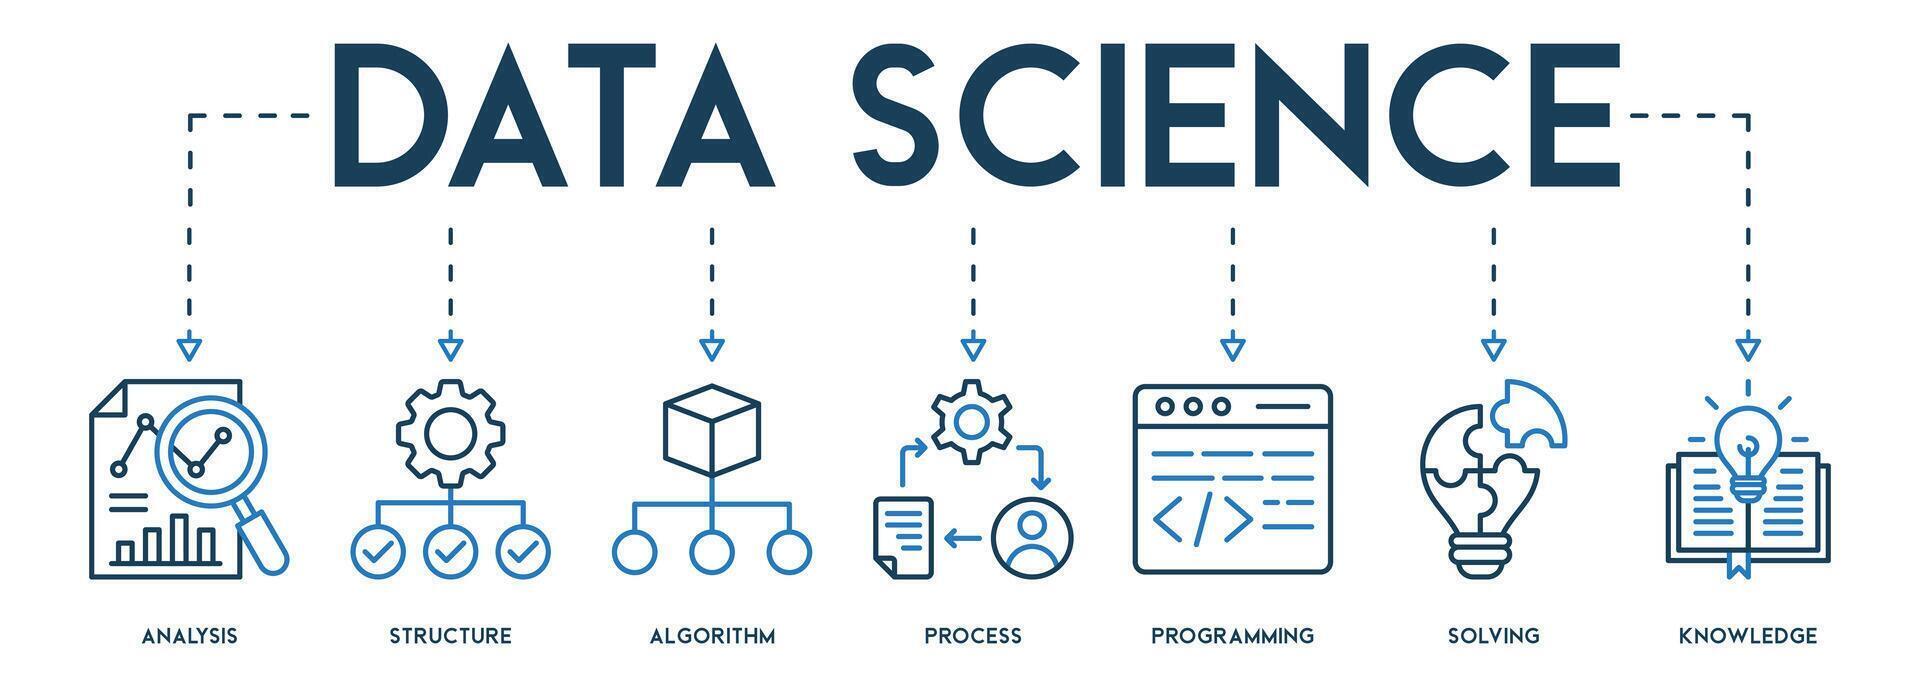 Banner Data science concept with English keywords and icon of analysis, structure, algorithm, process, programming, solving and knowledge vector